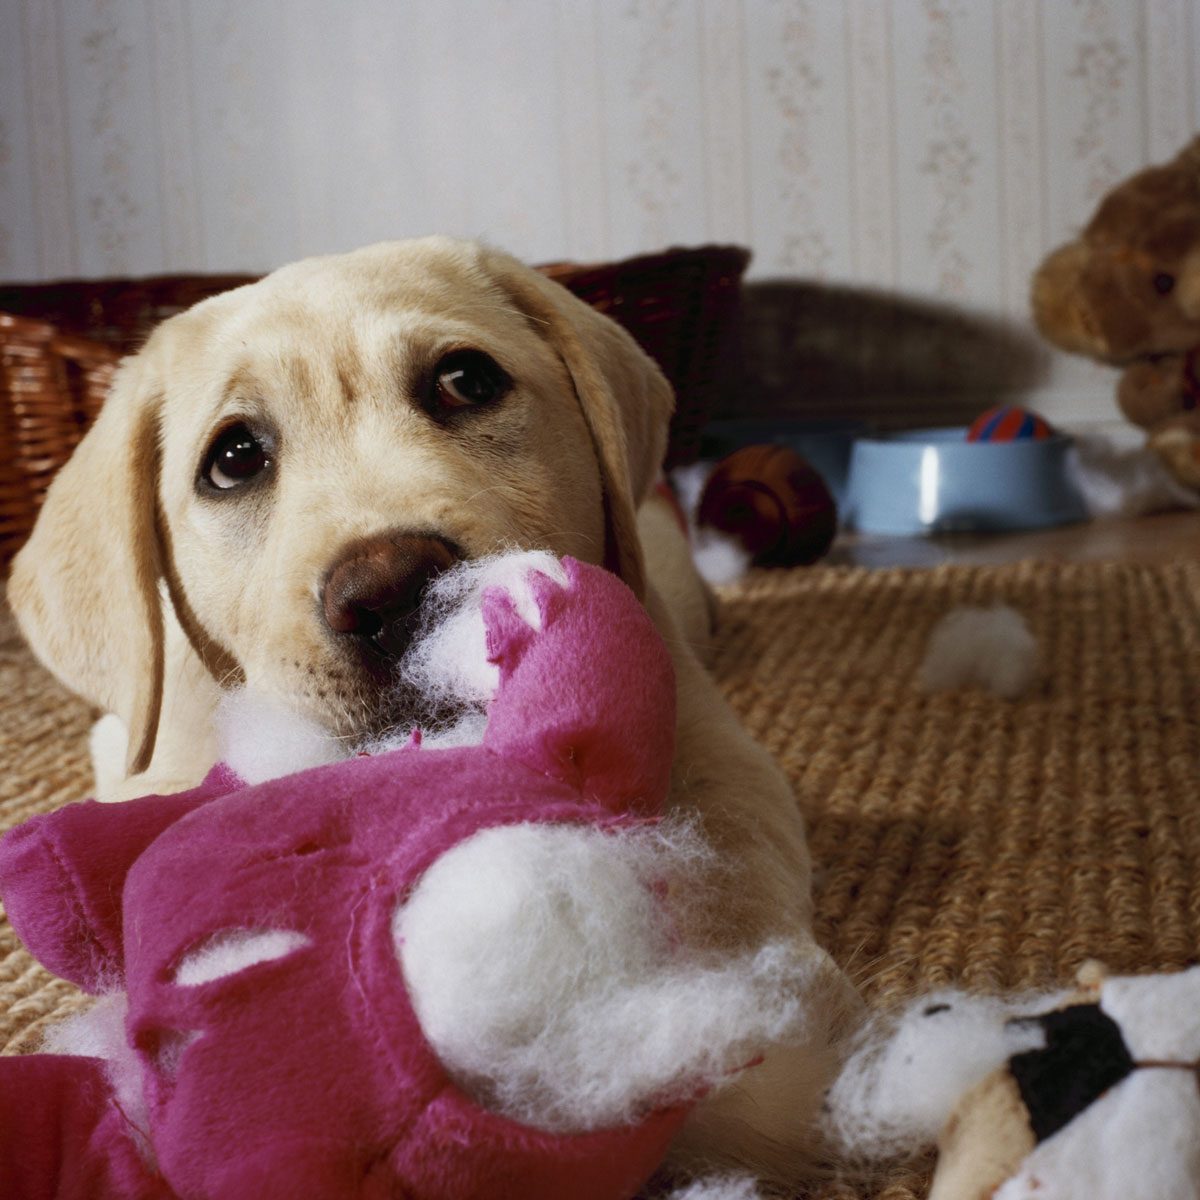 The Dog Toys And Treats You Should Avoid Buying At The Pet Shop